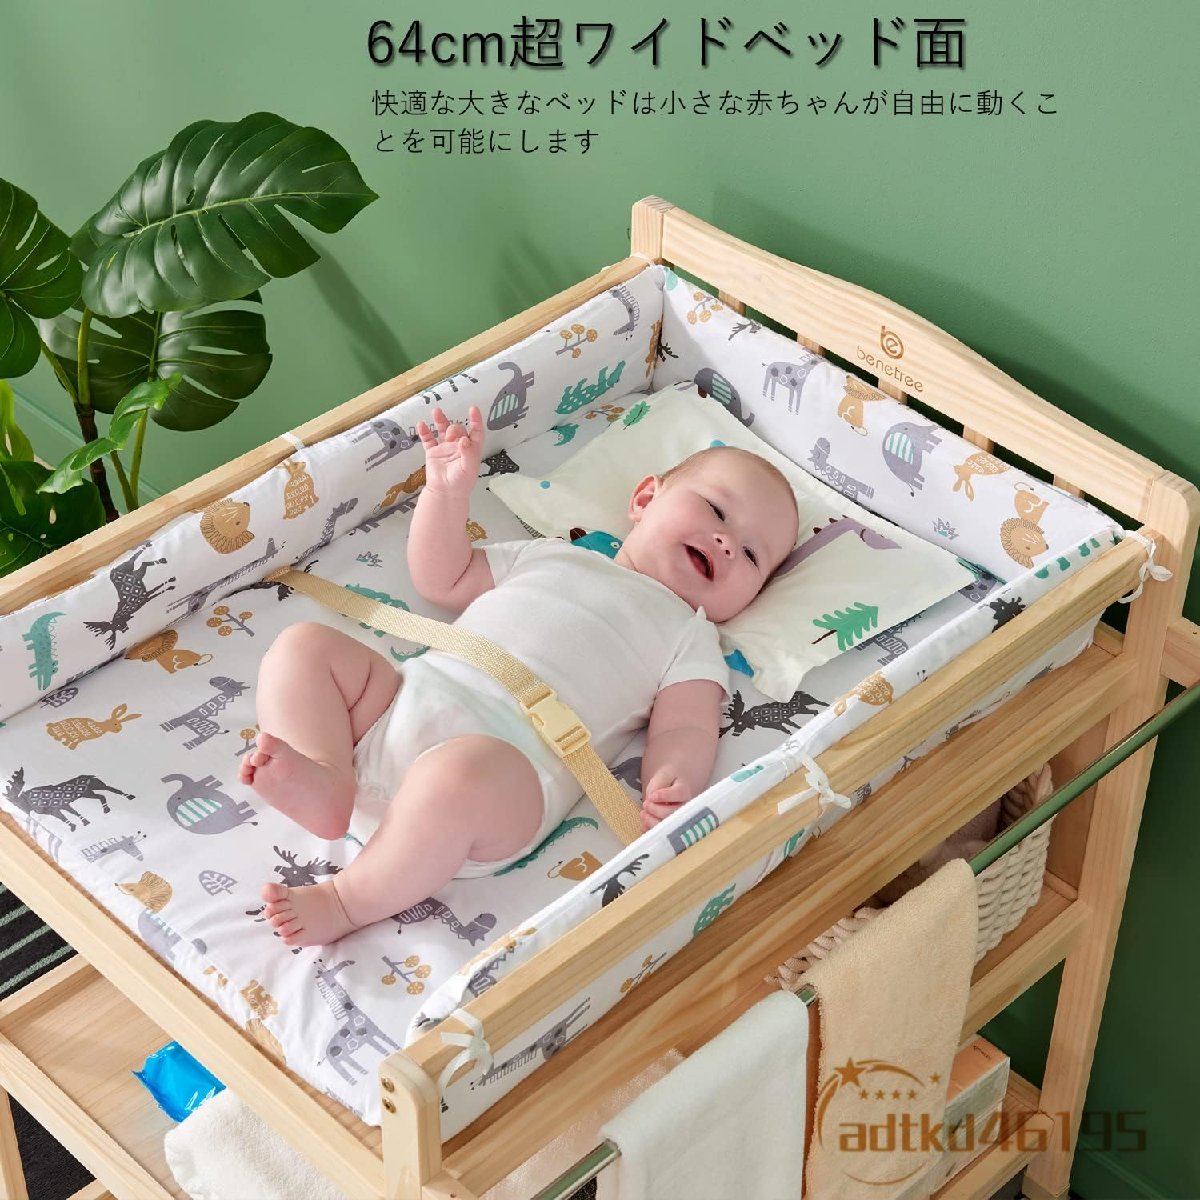  wooden baby care diapers exchange pcs newborn baby Homme tsu exchange pcs crib diapers change seat with casters child care . with casters storage shelves attaching 